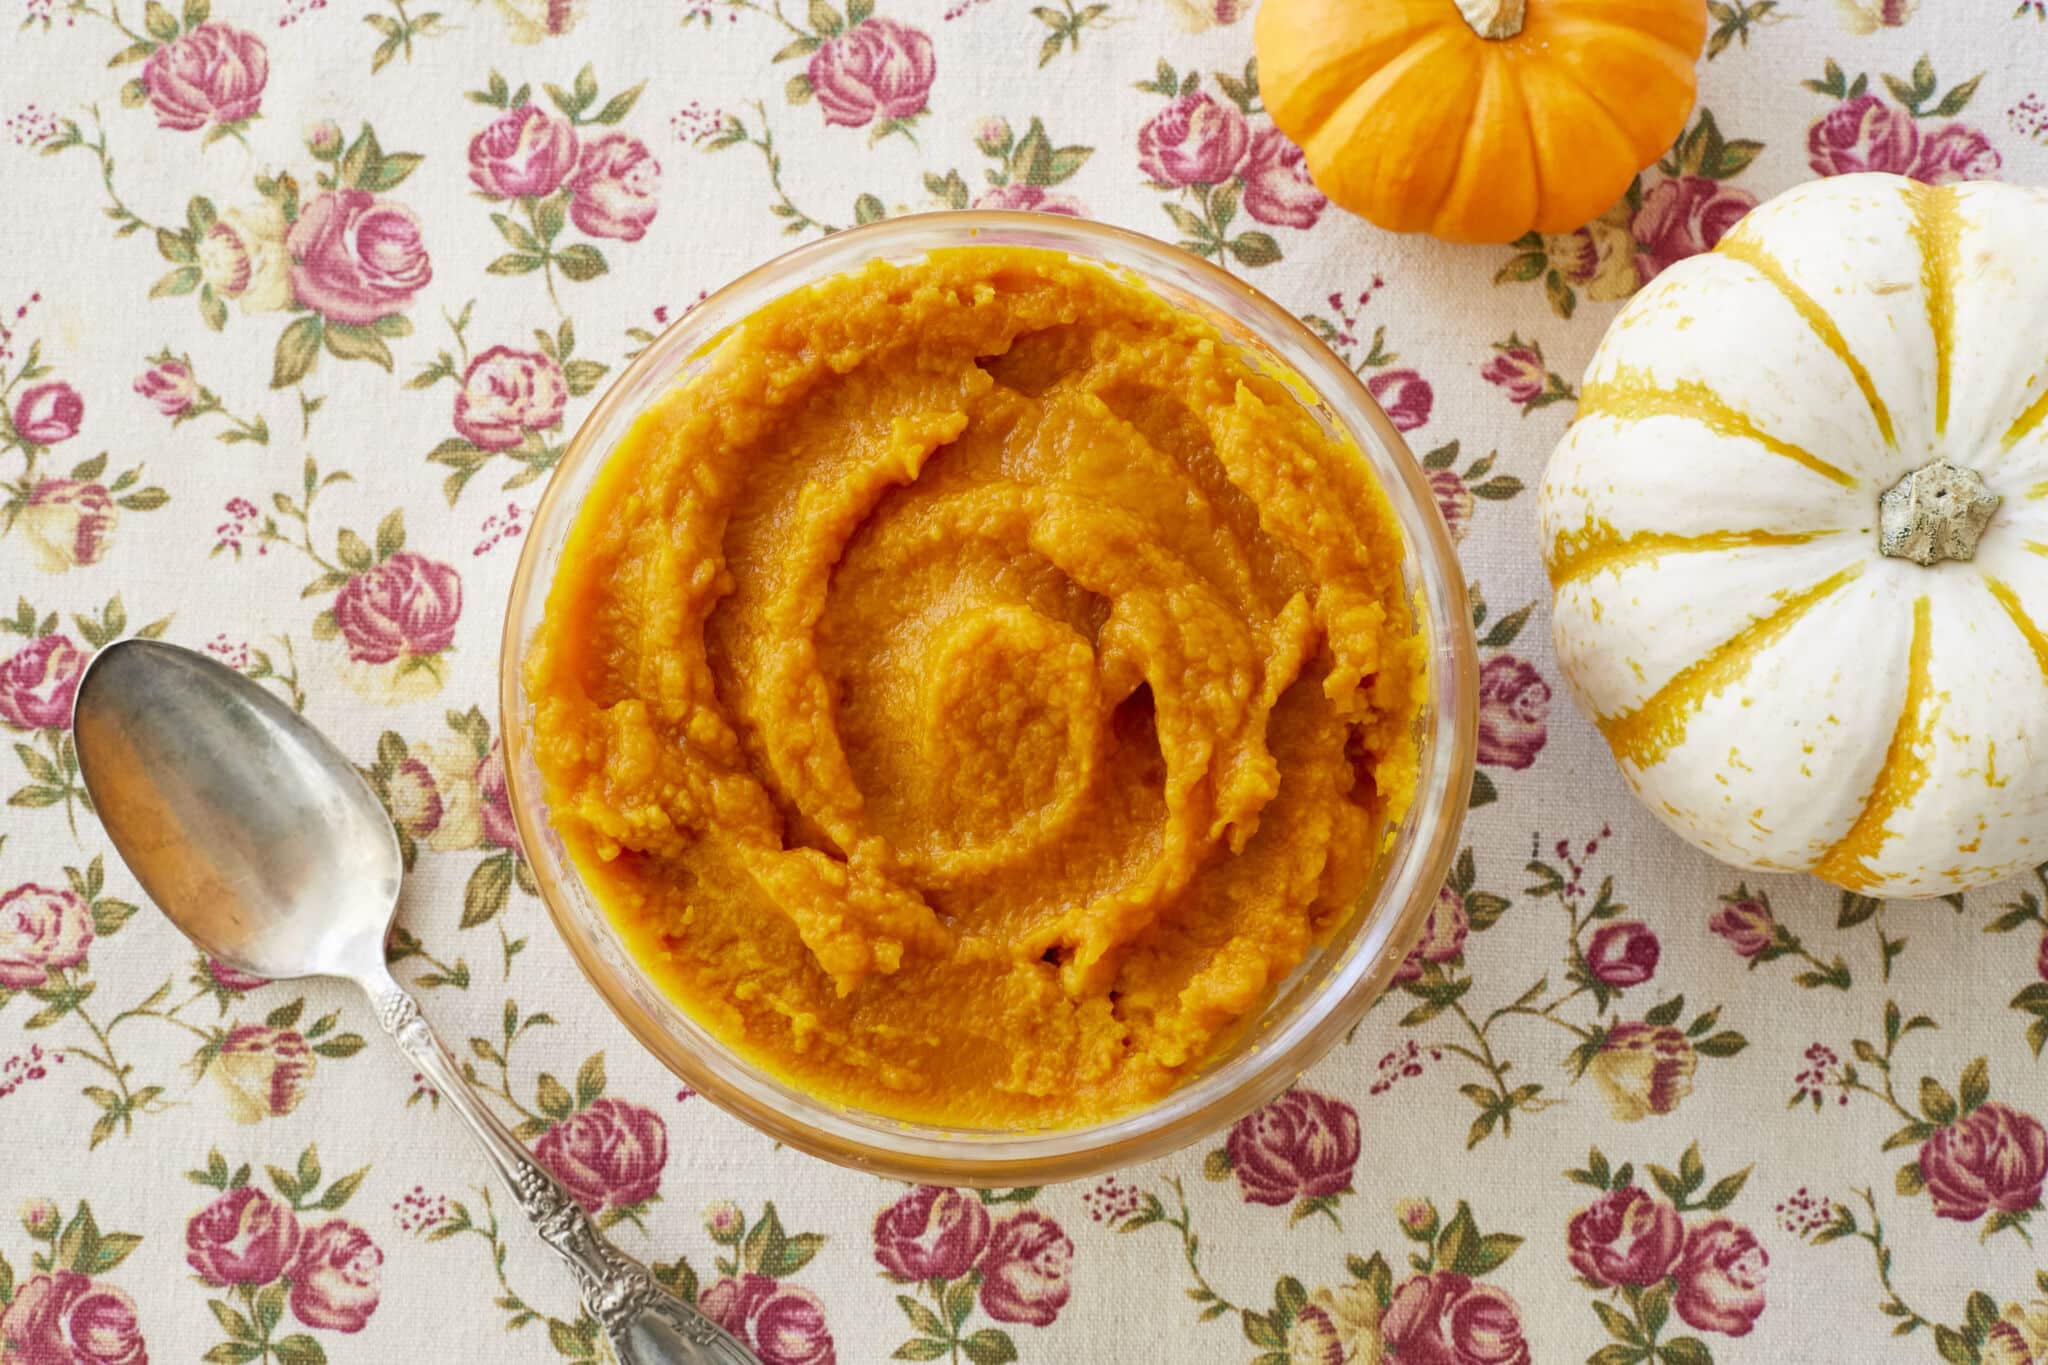 Homemade Pumpkin puree is in a glass bowl in a vibrant orange color and with a smooth moist consistency. A silver spoon is on the left and an orange sugar pumpkin and a white pumpkin are on the right side.